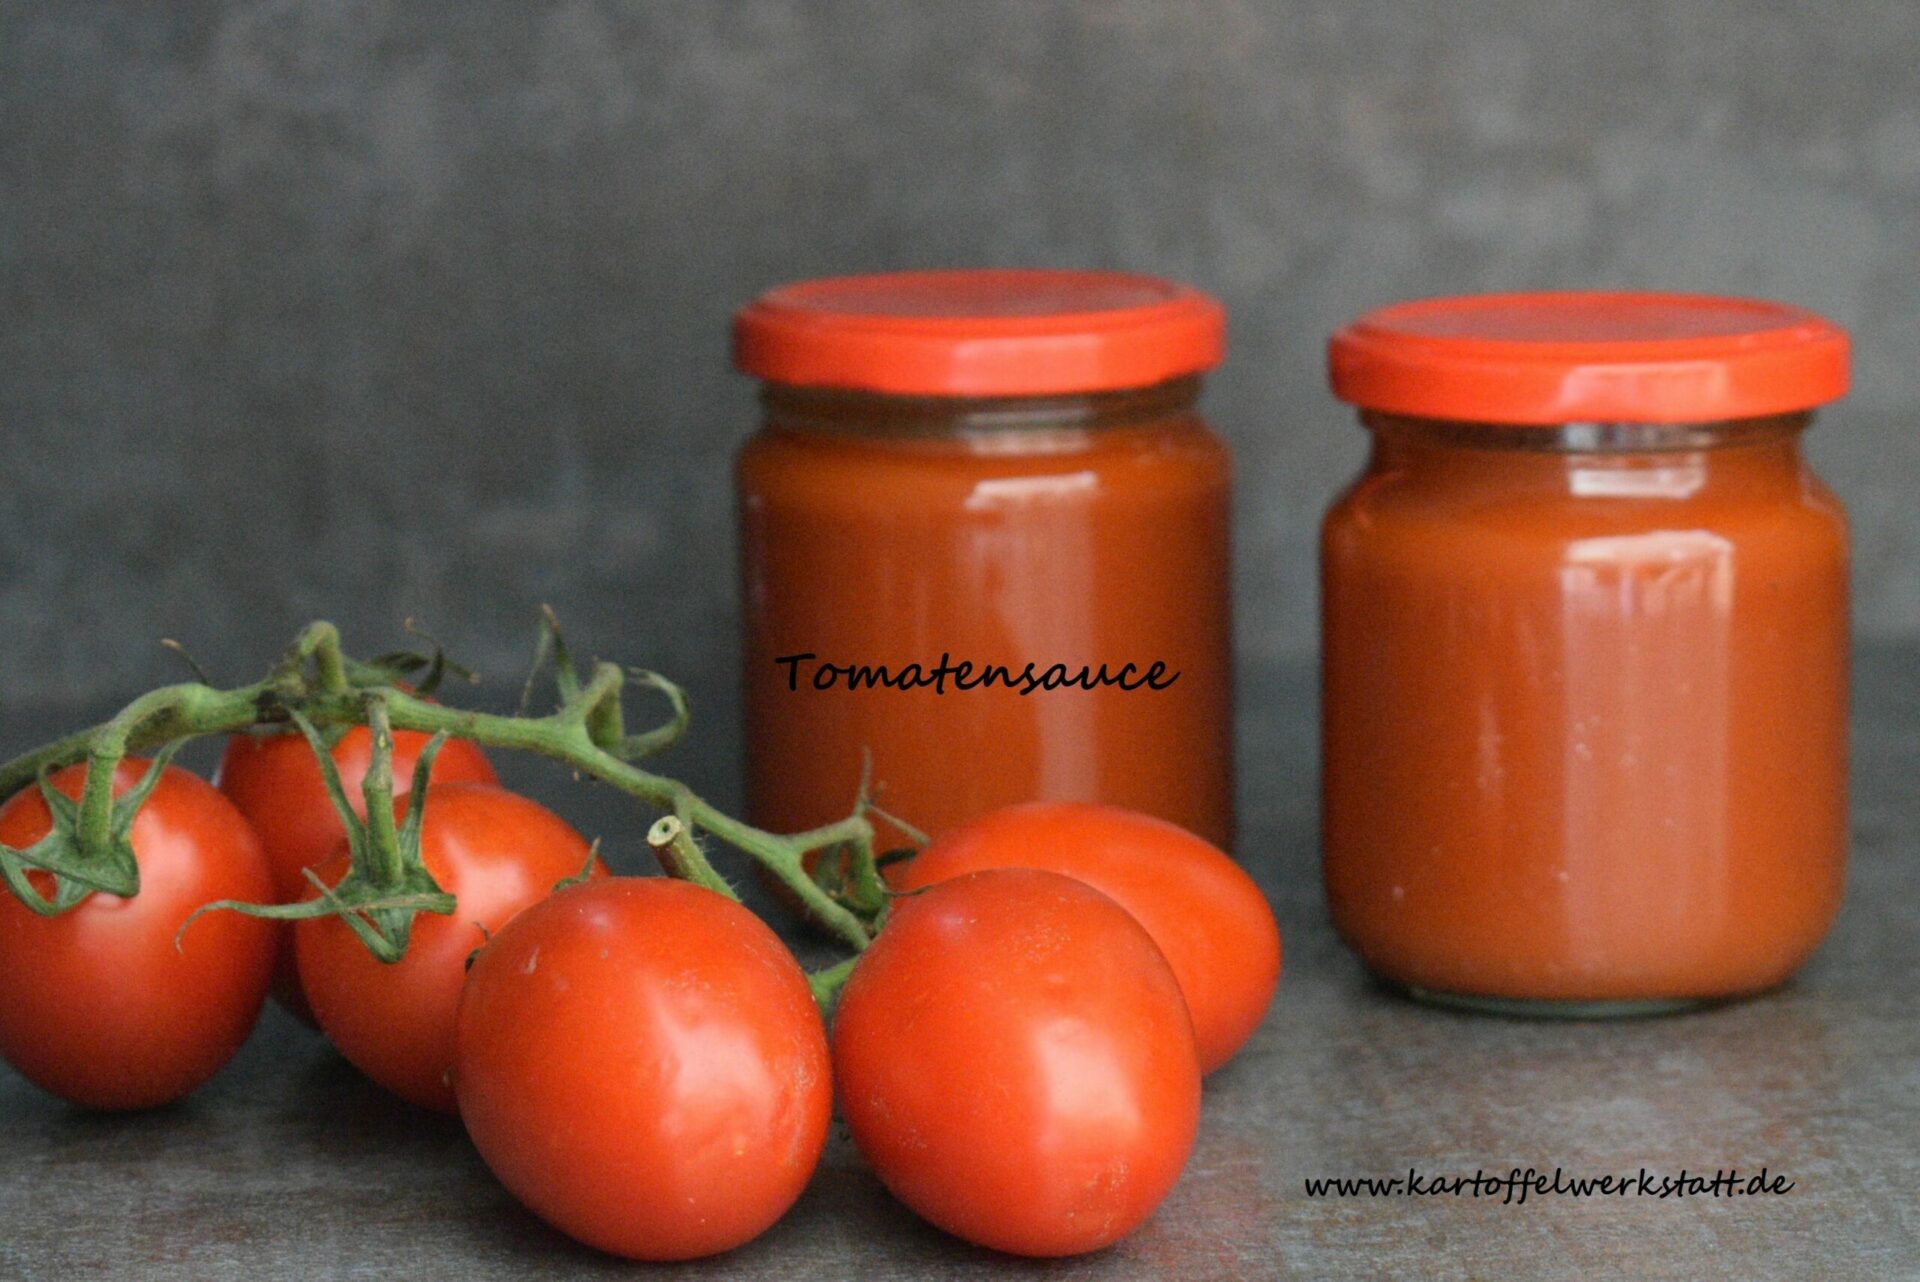 Tomatensauce scaled